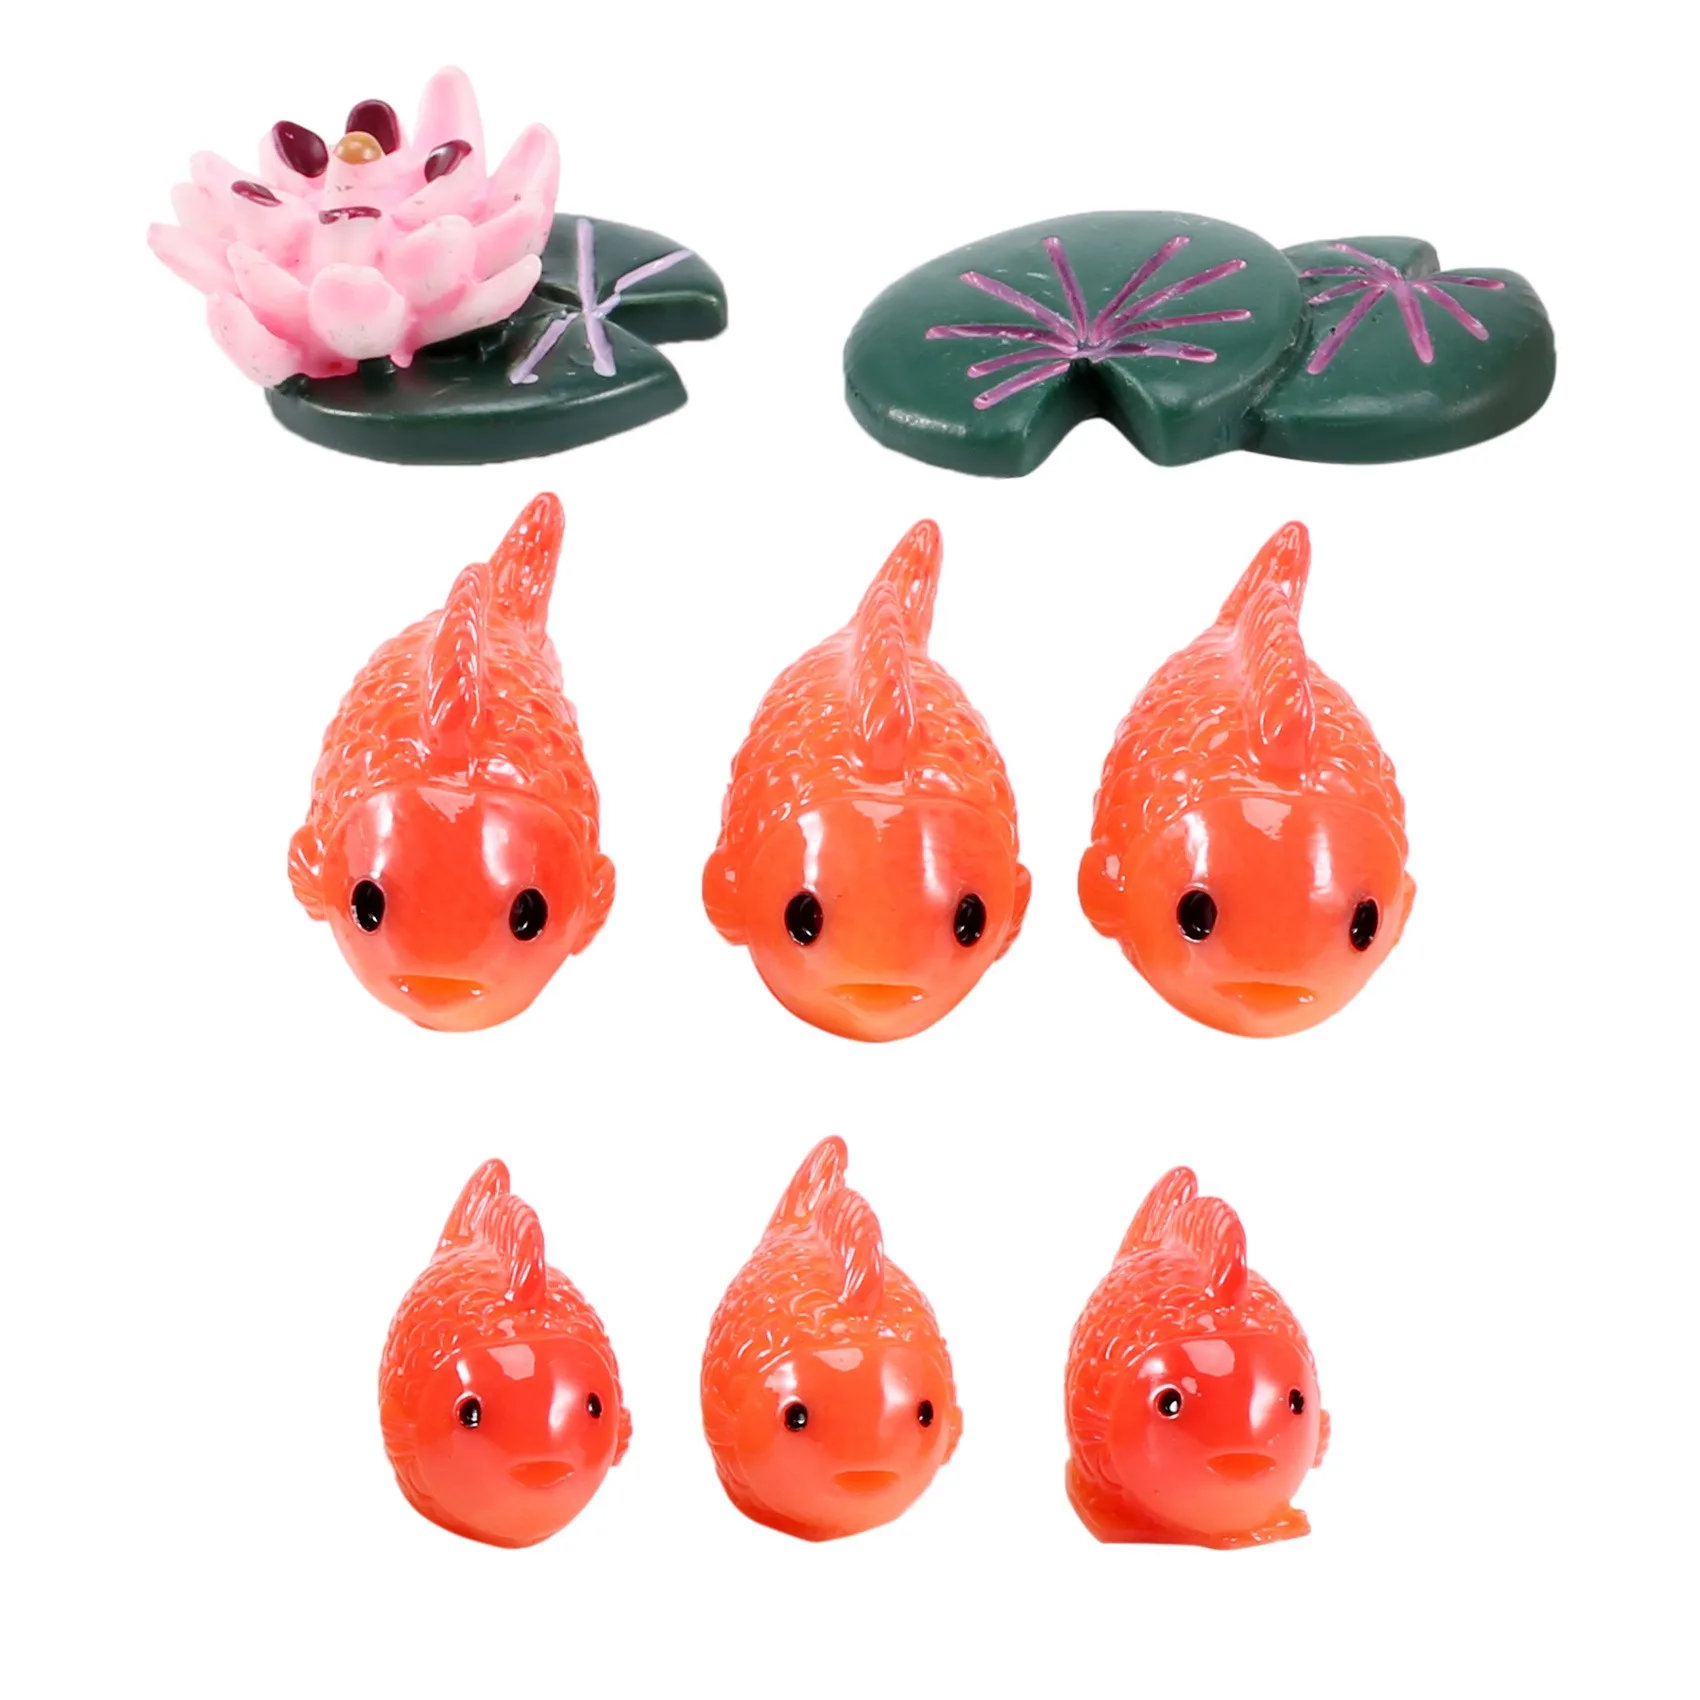 

8pc/lot Red Fish miniature figures decorative mini fairy garden animals Moss -landscape ornaments resin baby toy